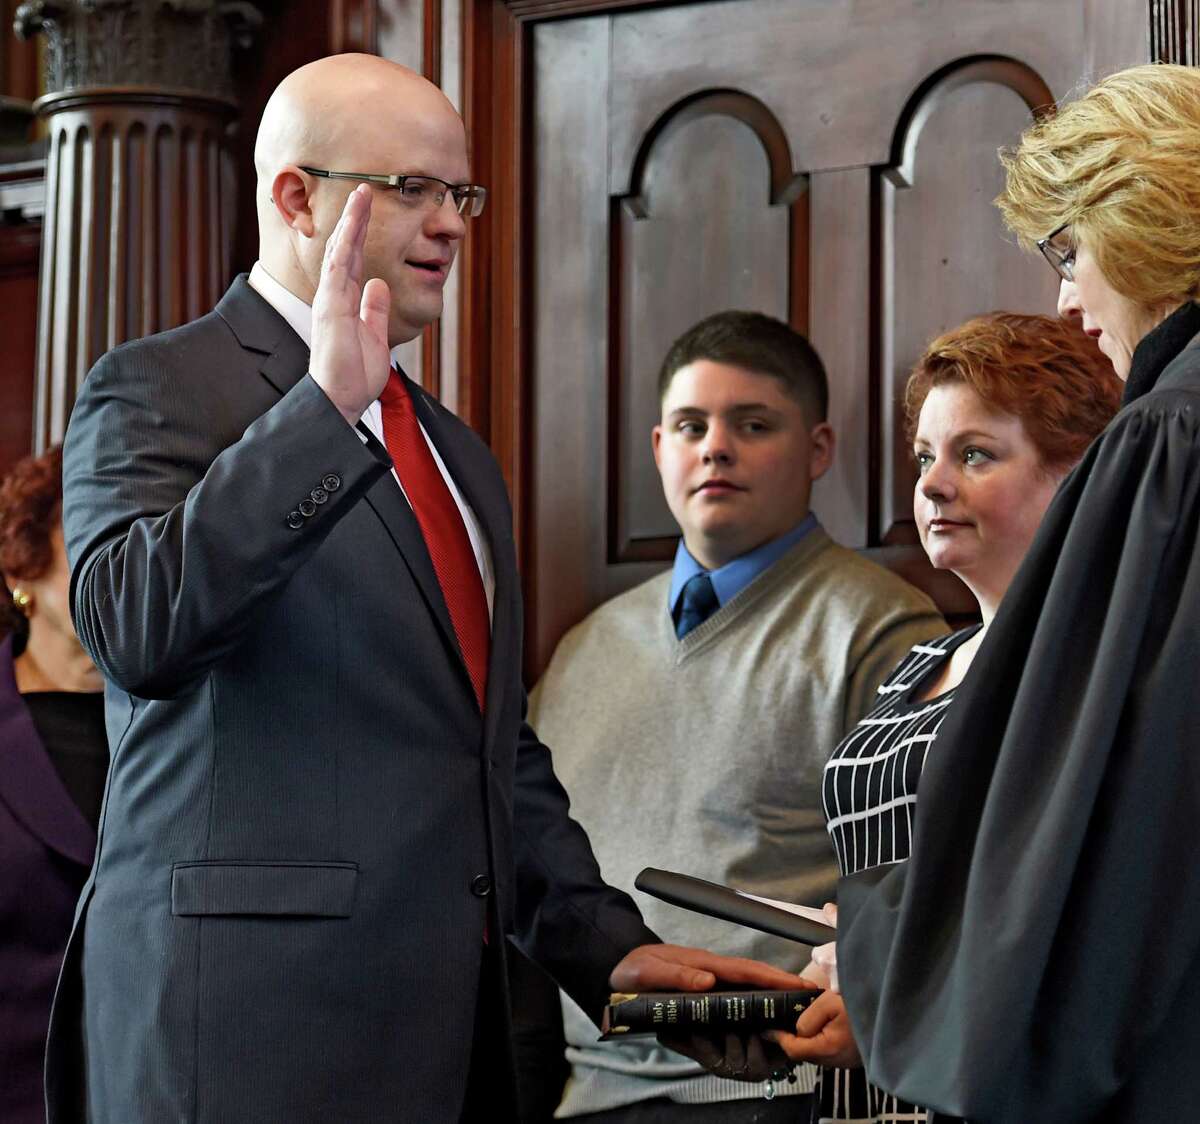 Rensselaer County District Attorney Joel Abelove, left, was sworn in on Jan. 1, 2015, by County Judge Debra Young as family members watched at the Rensselaer County Courthouse in Troy, N.Y. (Skip Dickstein/Times Union archive)